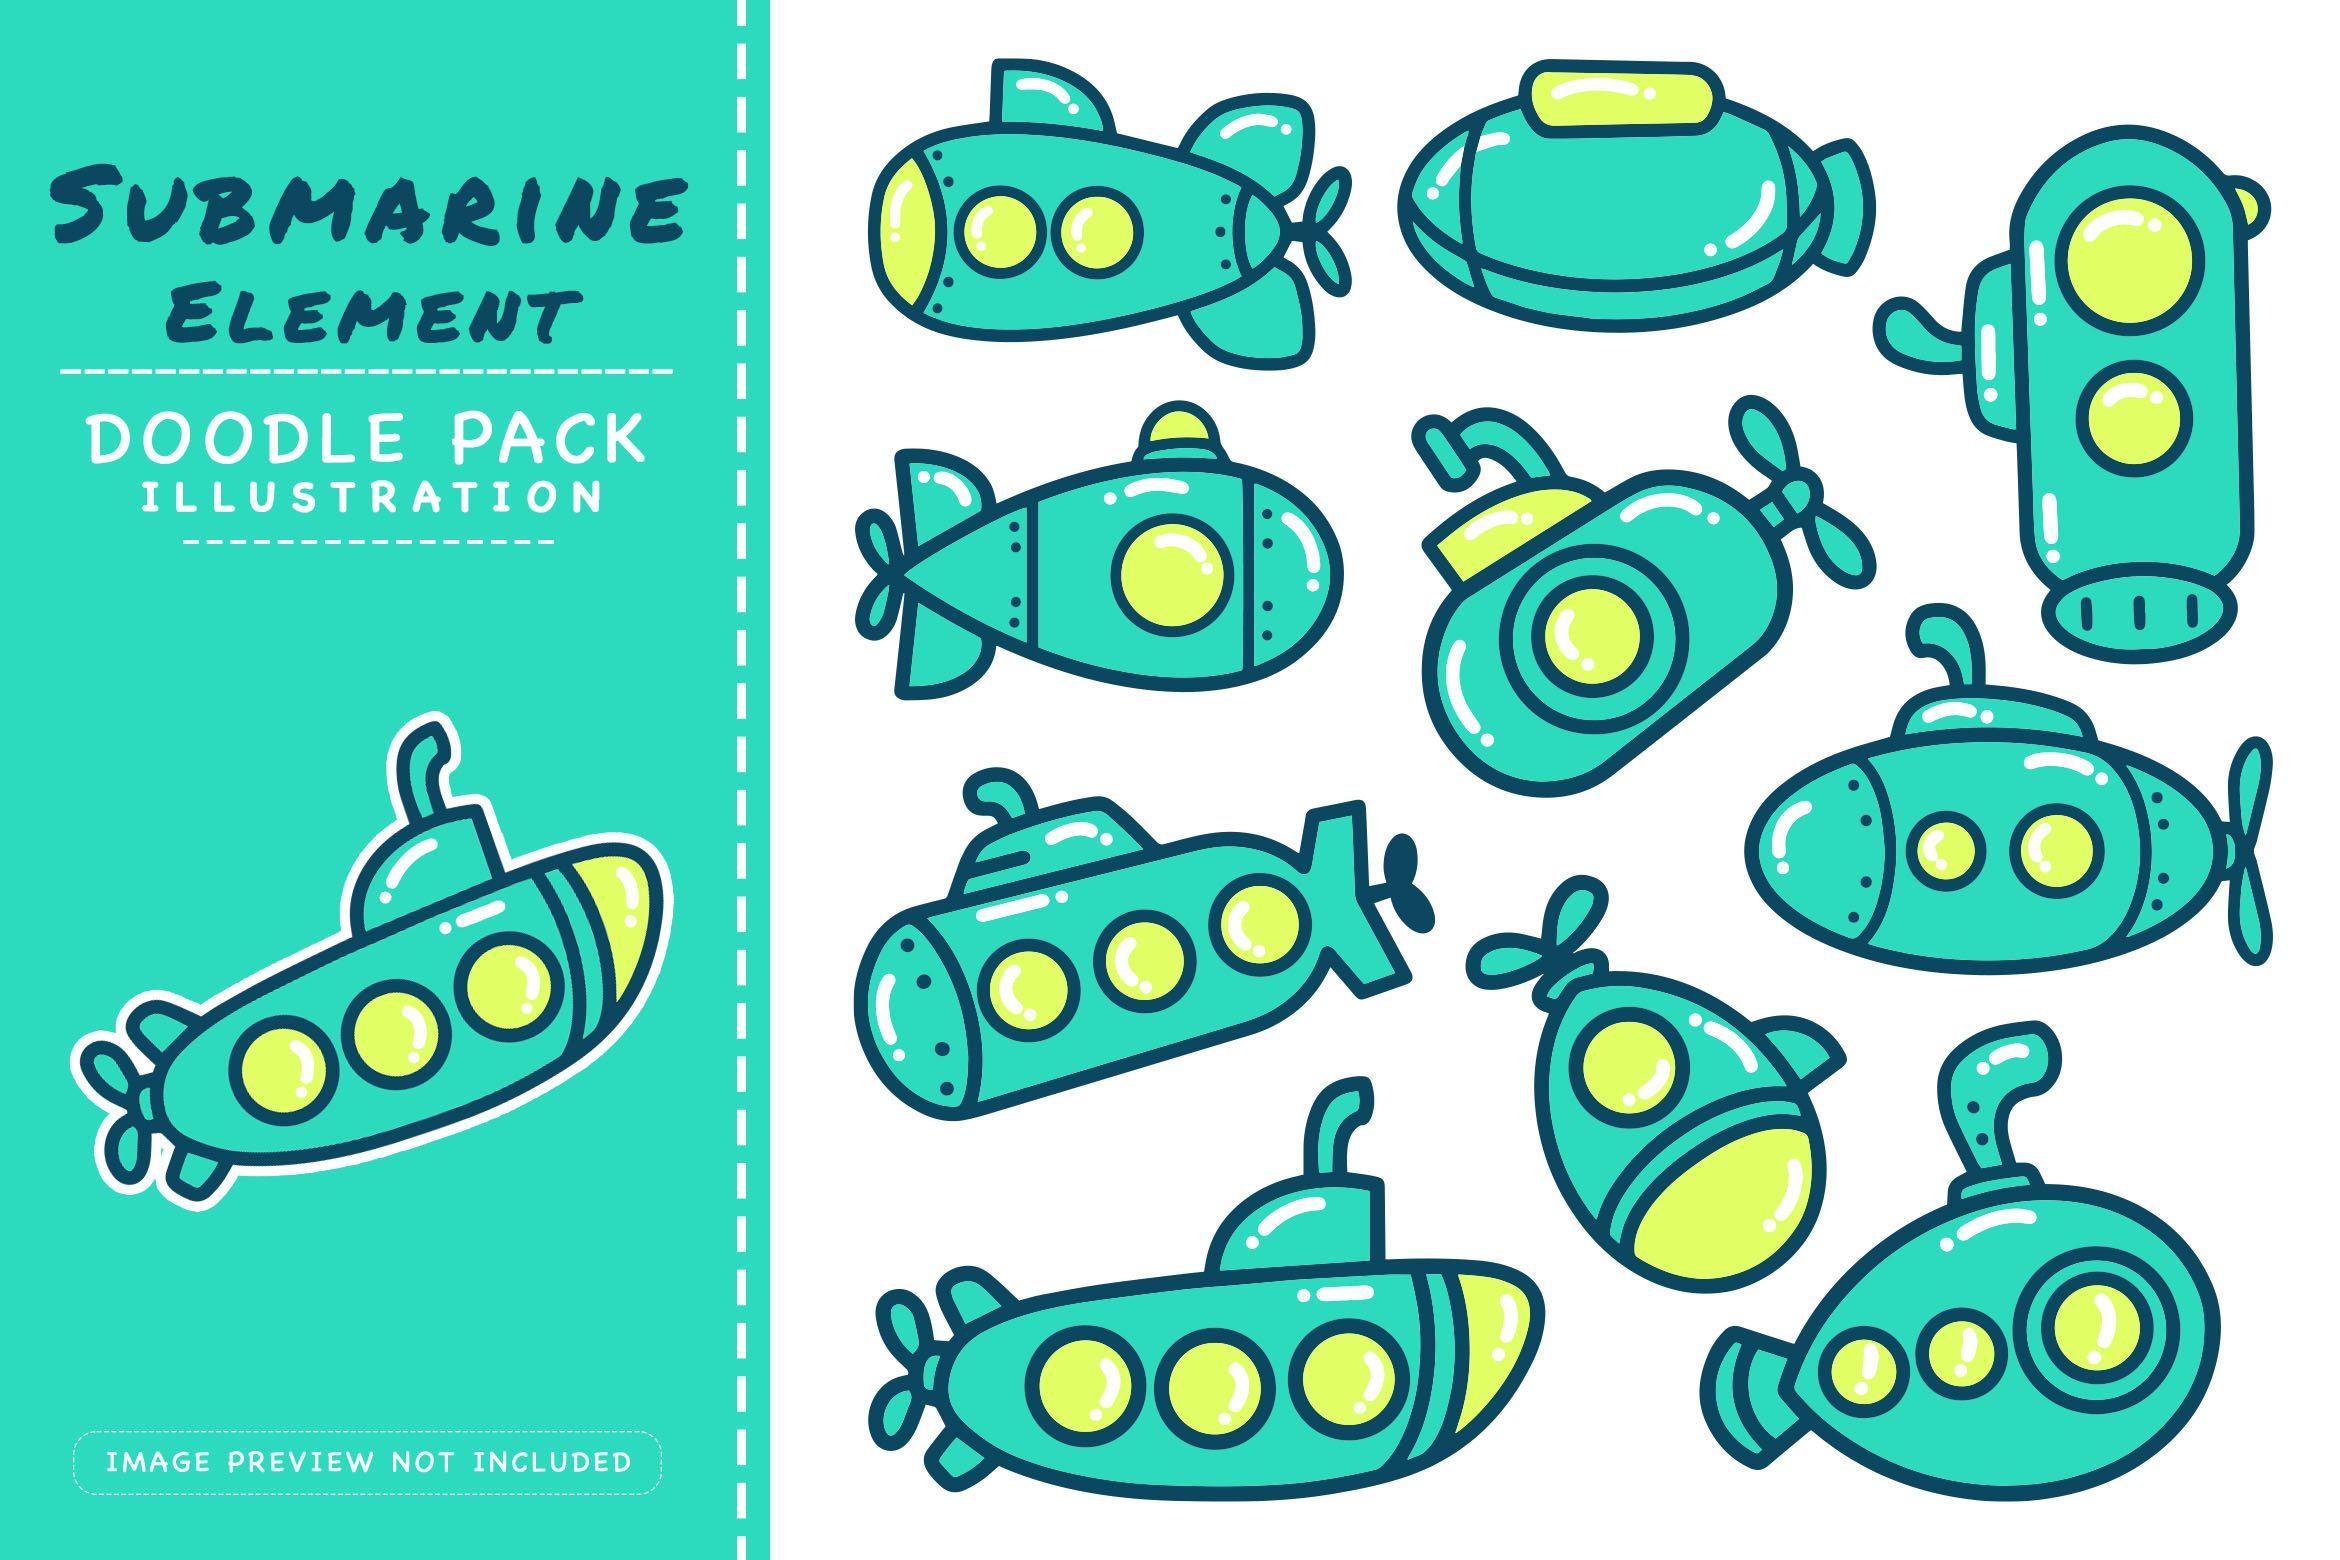 Submarine Element - Doodle Pack cover image.